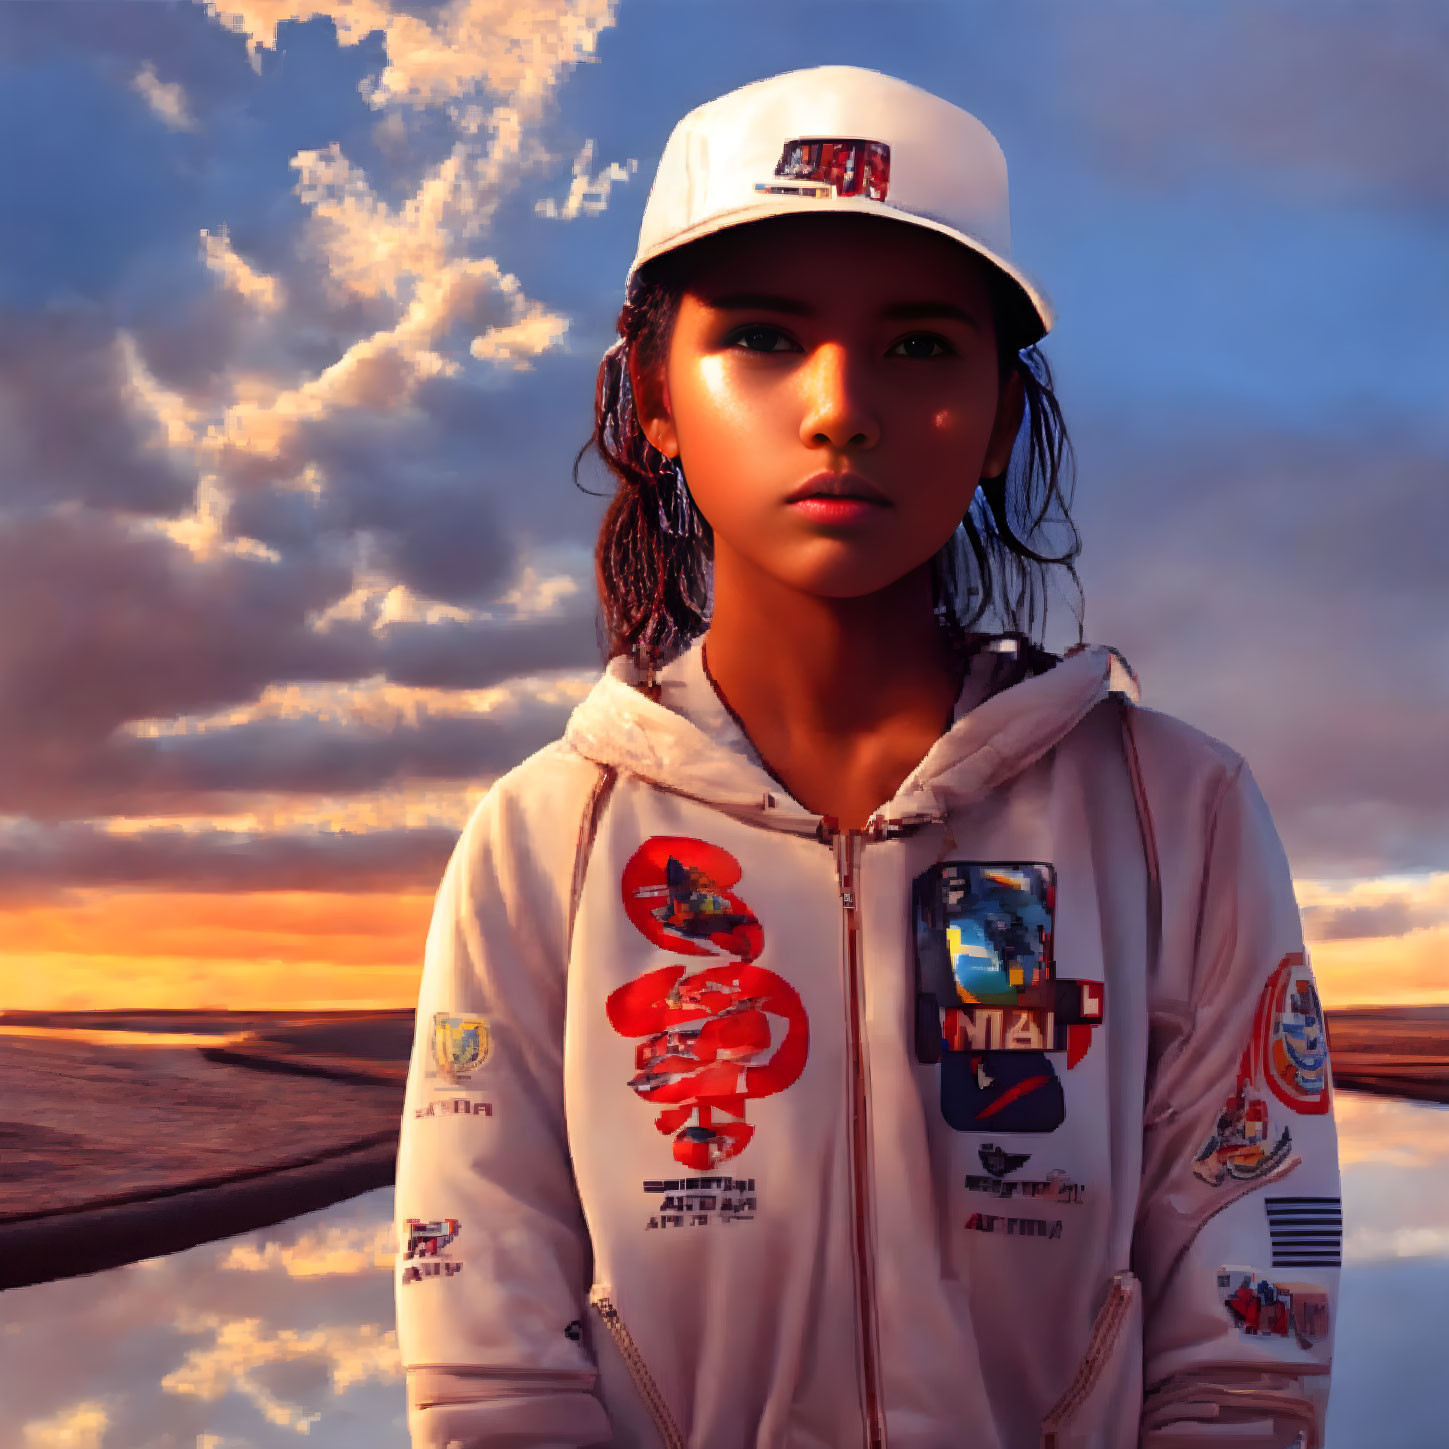 Young woman in white cap and hoodie under sunset sky